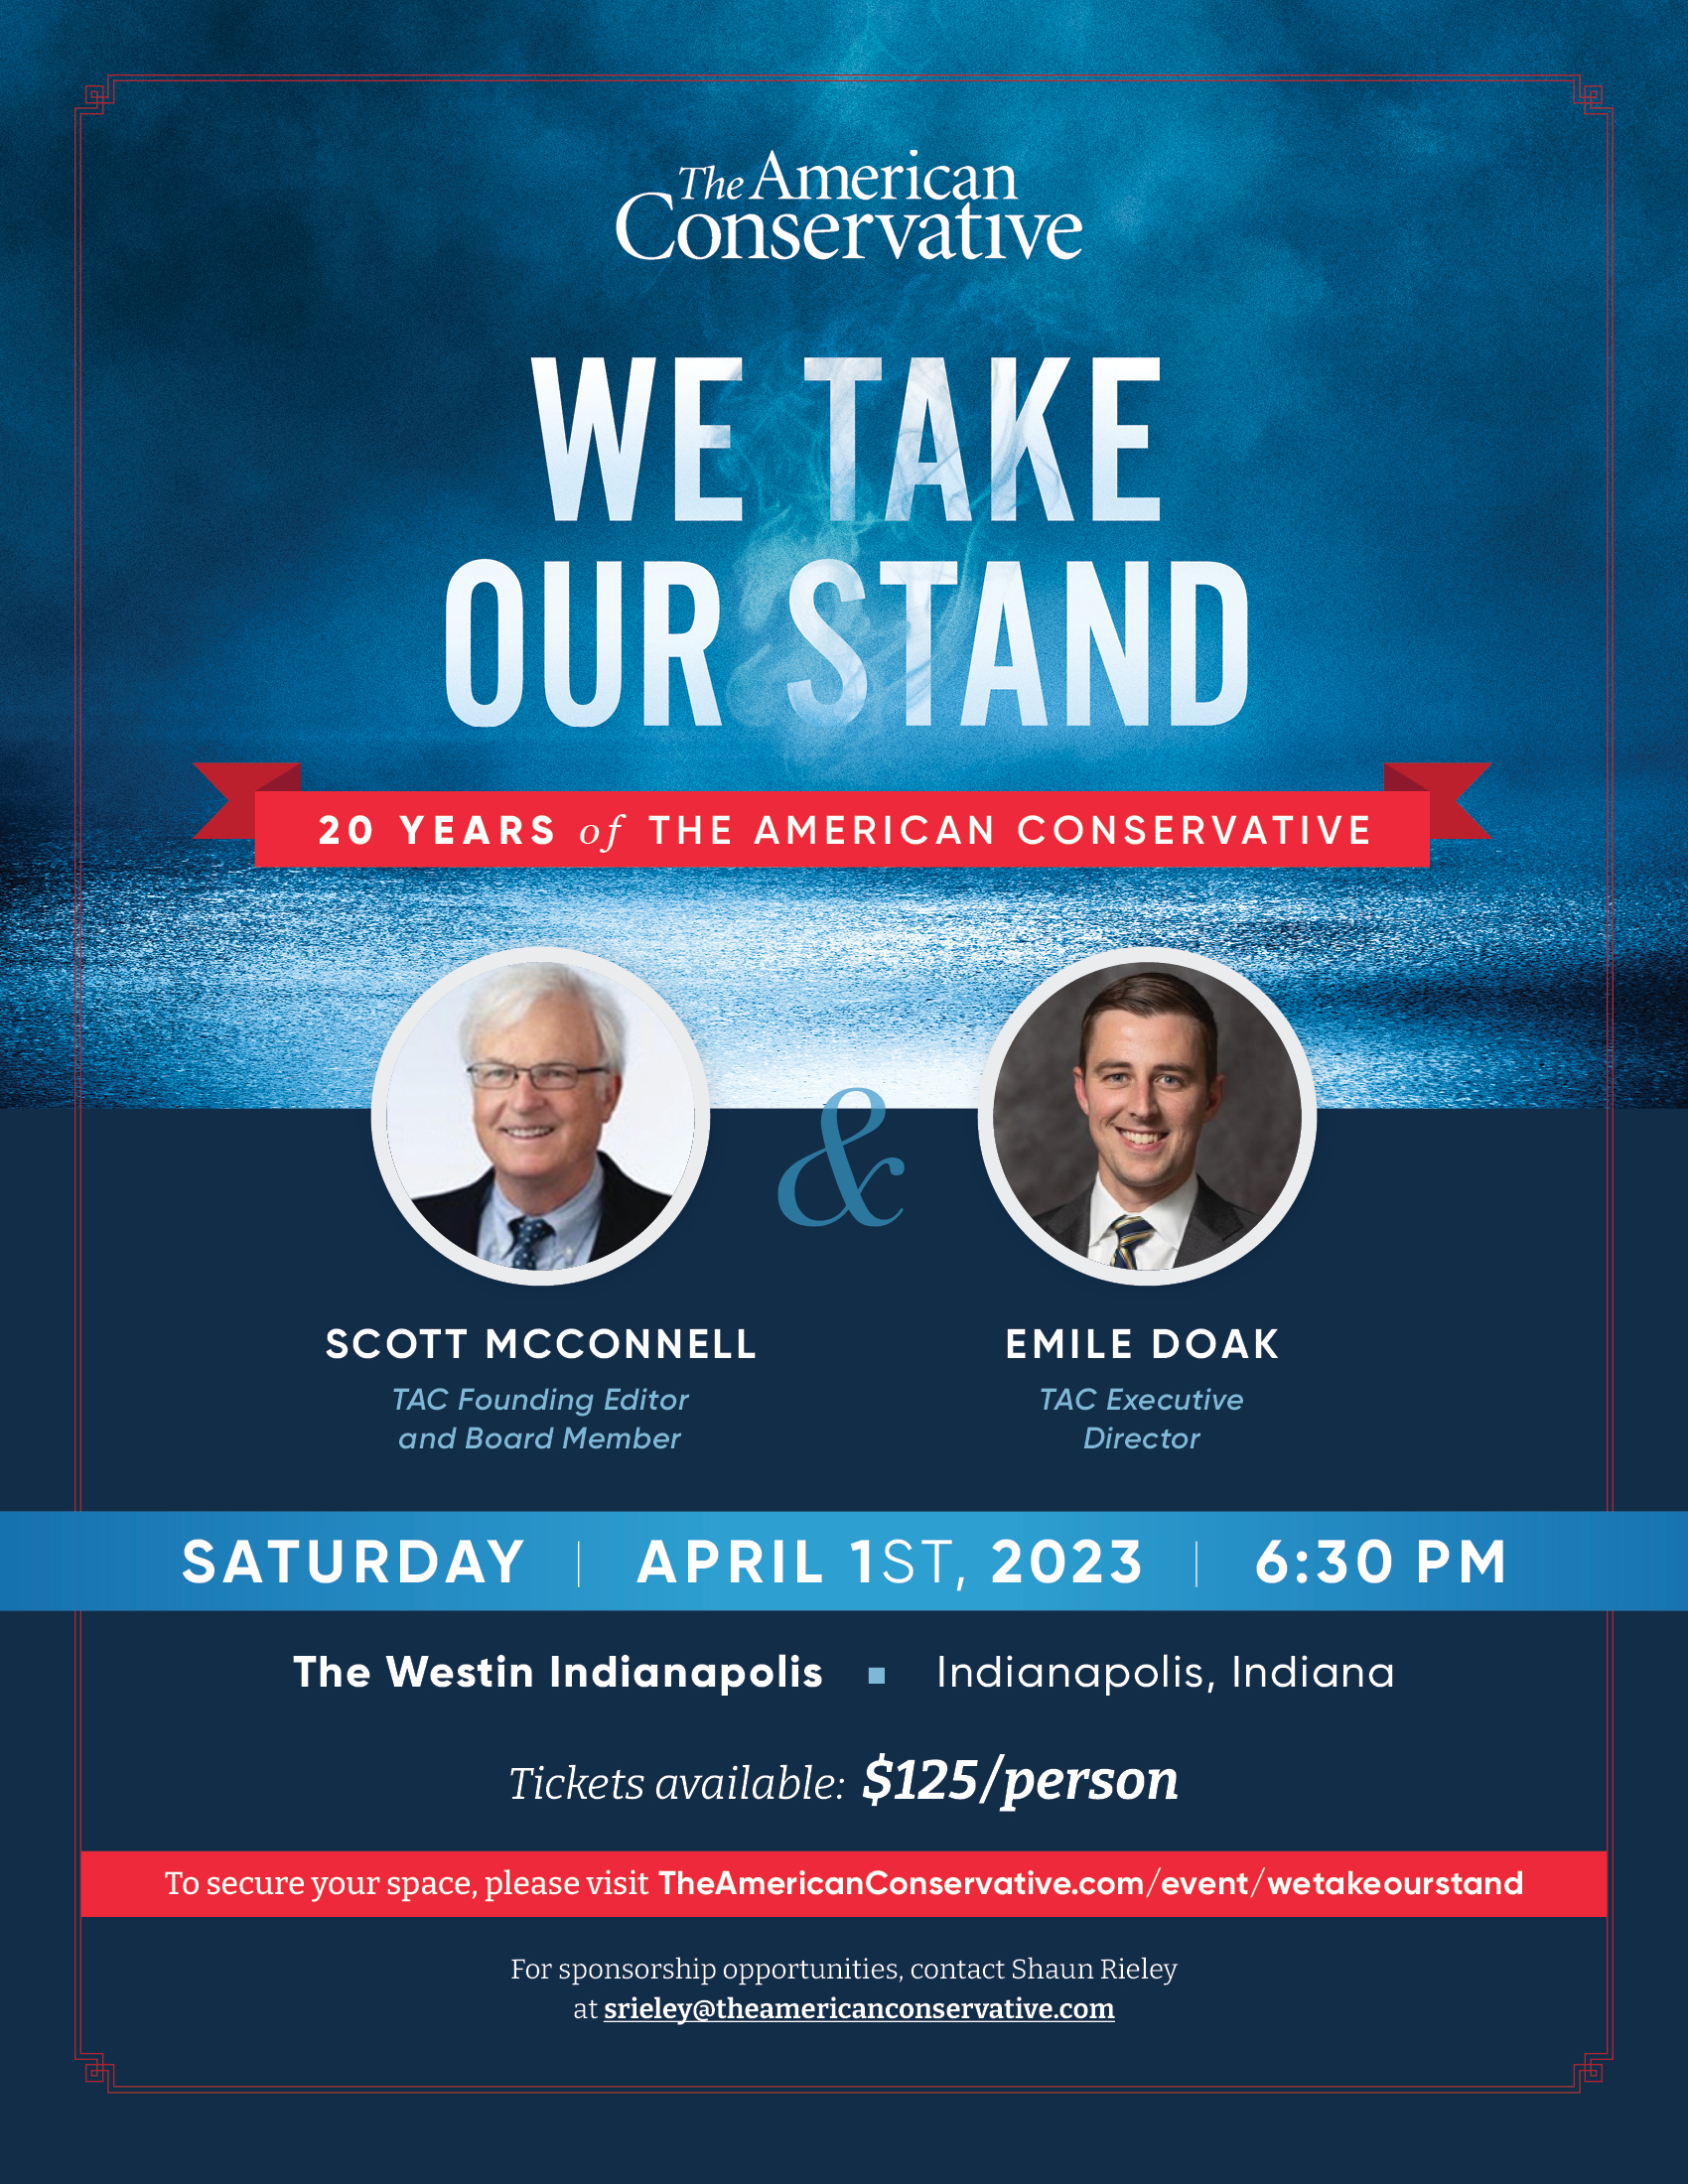 We Take Our Stand: 20 Years of The American Conservative